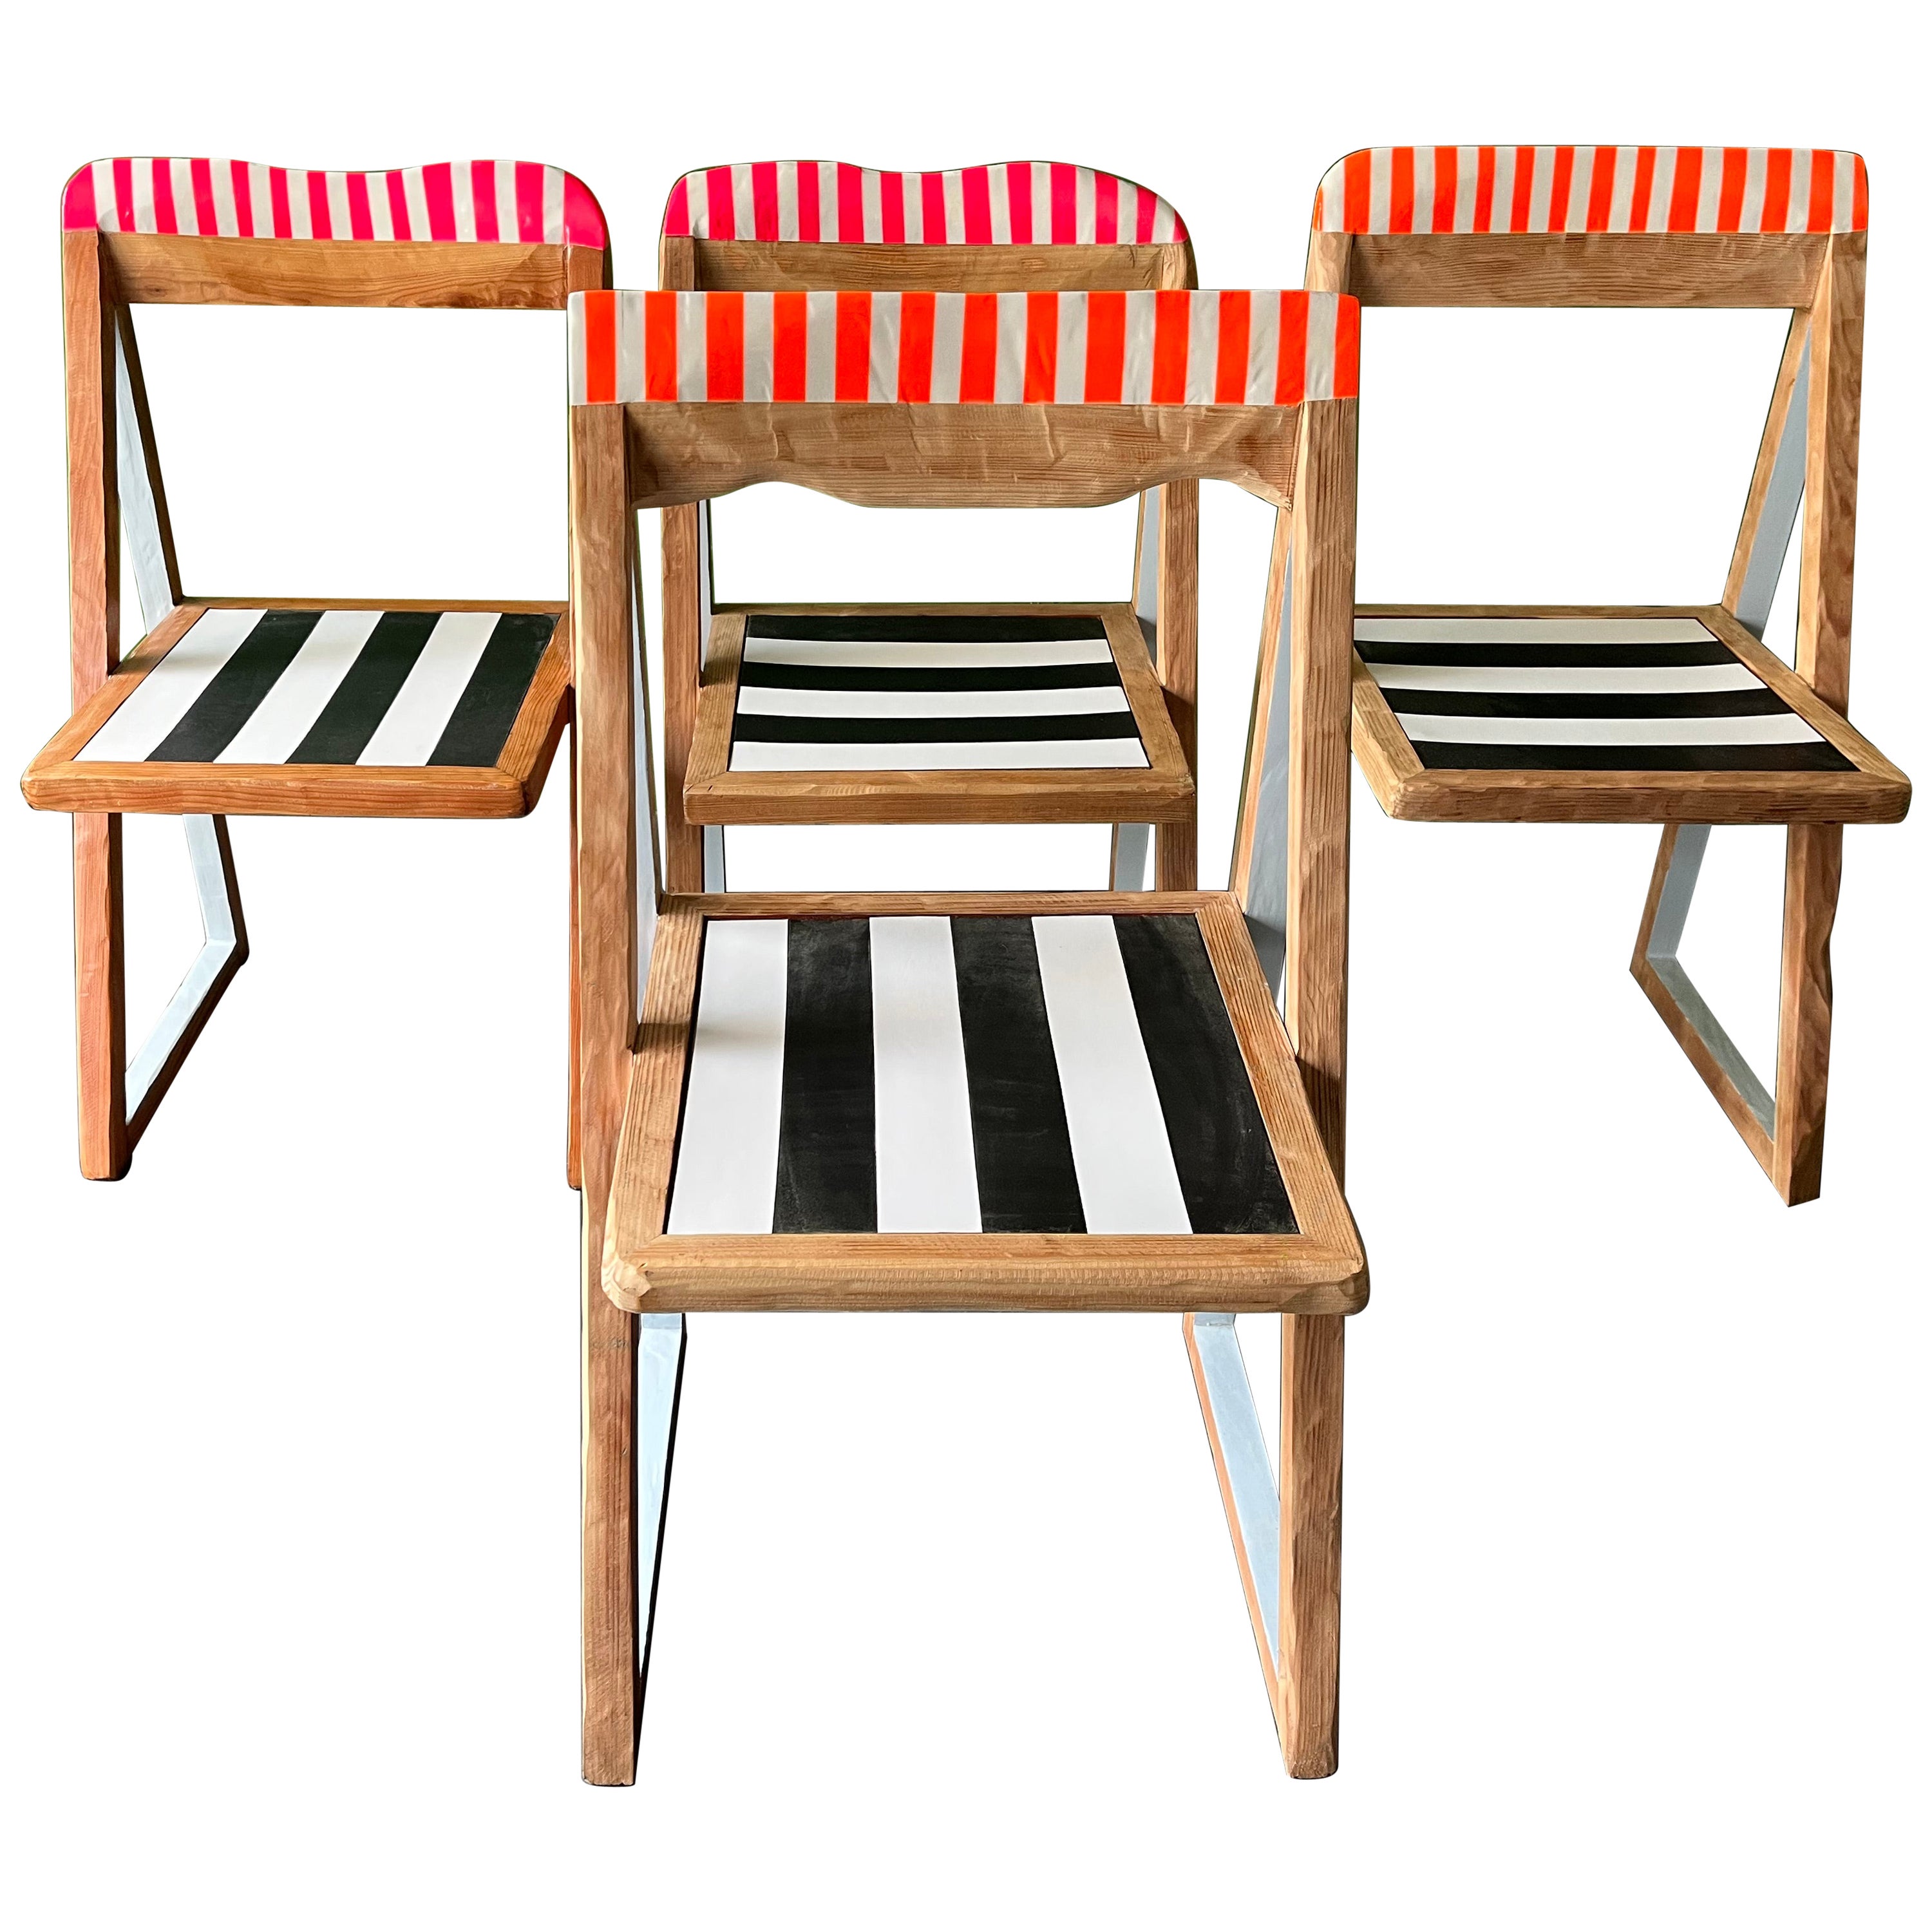 Black and white and pink, 4 dining chairs by Markus Friedrich Staab For Sale